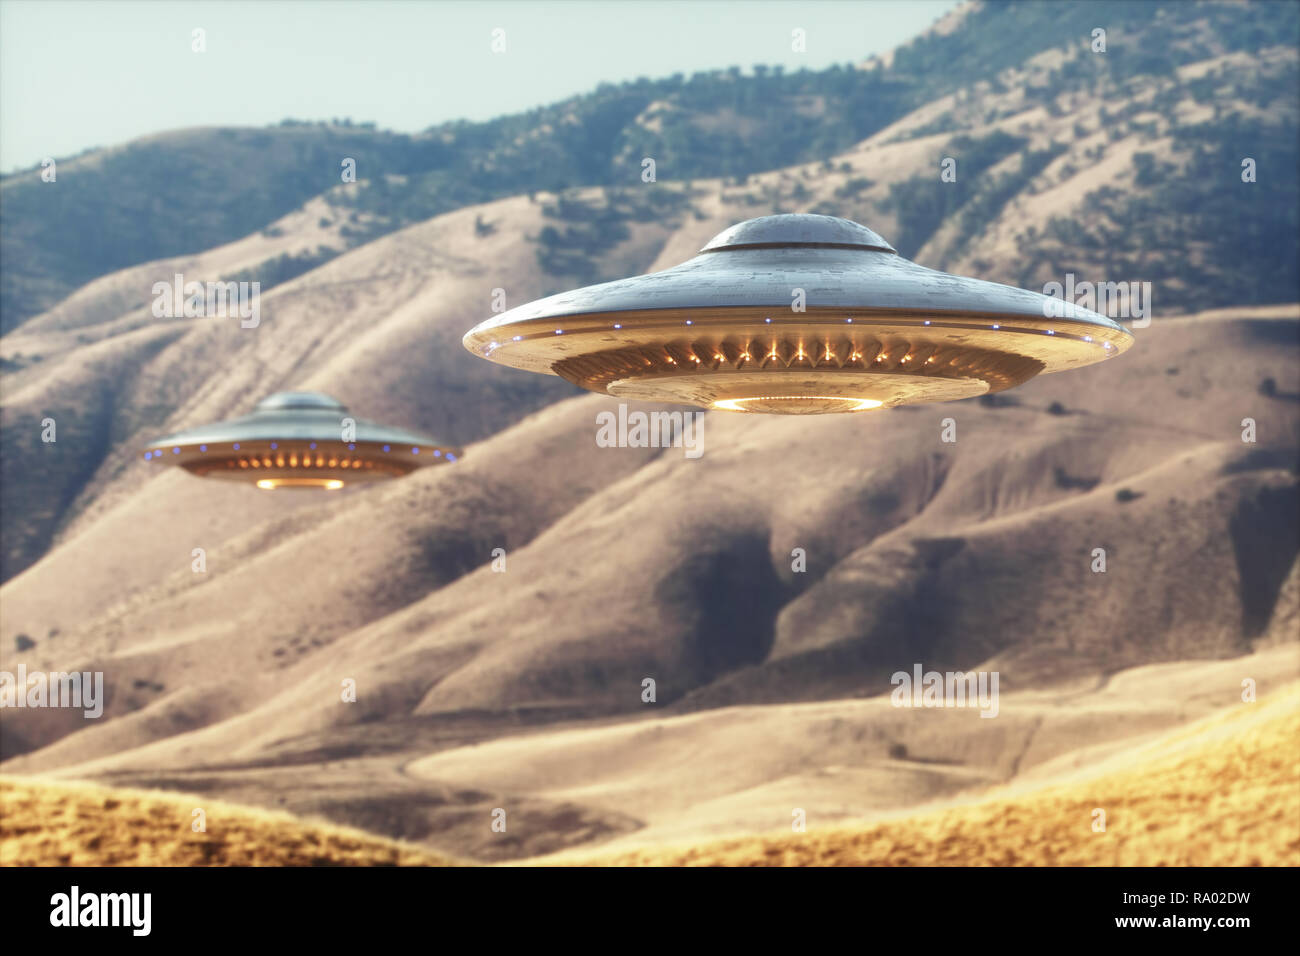 Two unidentified flying objects - UFO, flying over the sunny desert. Stock Photo